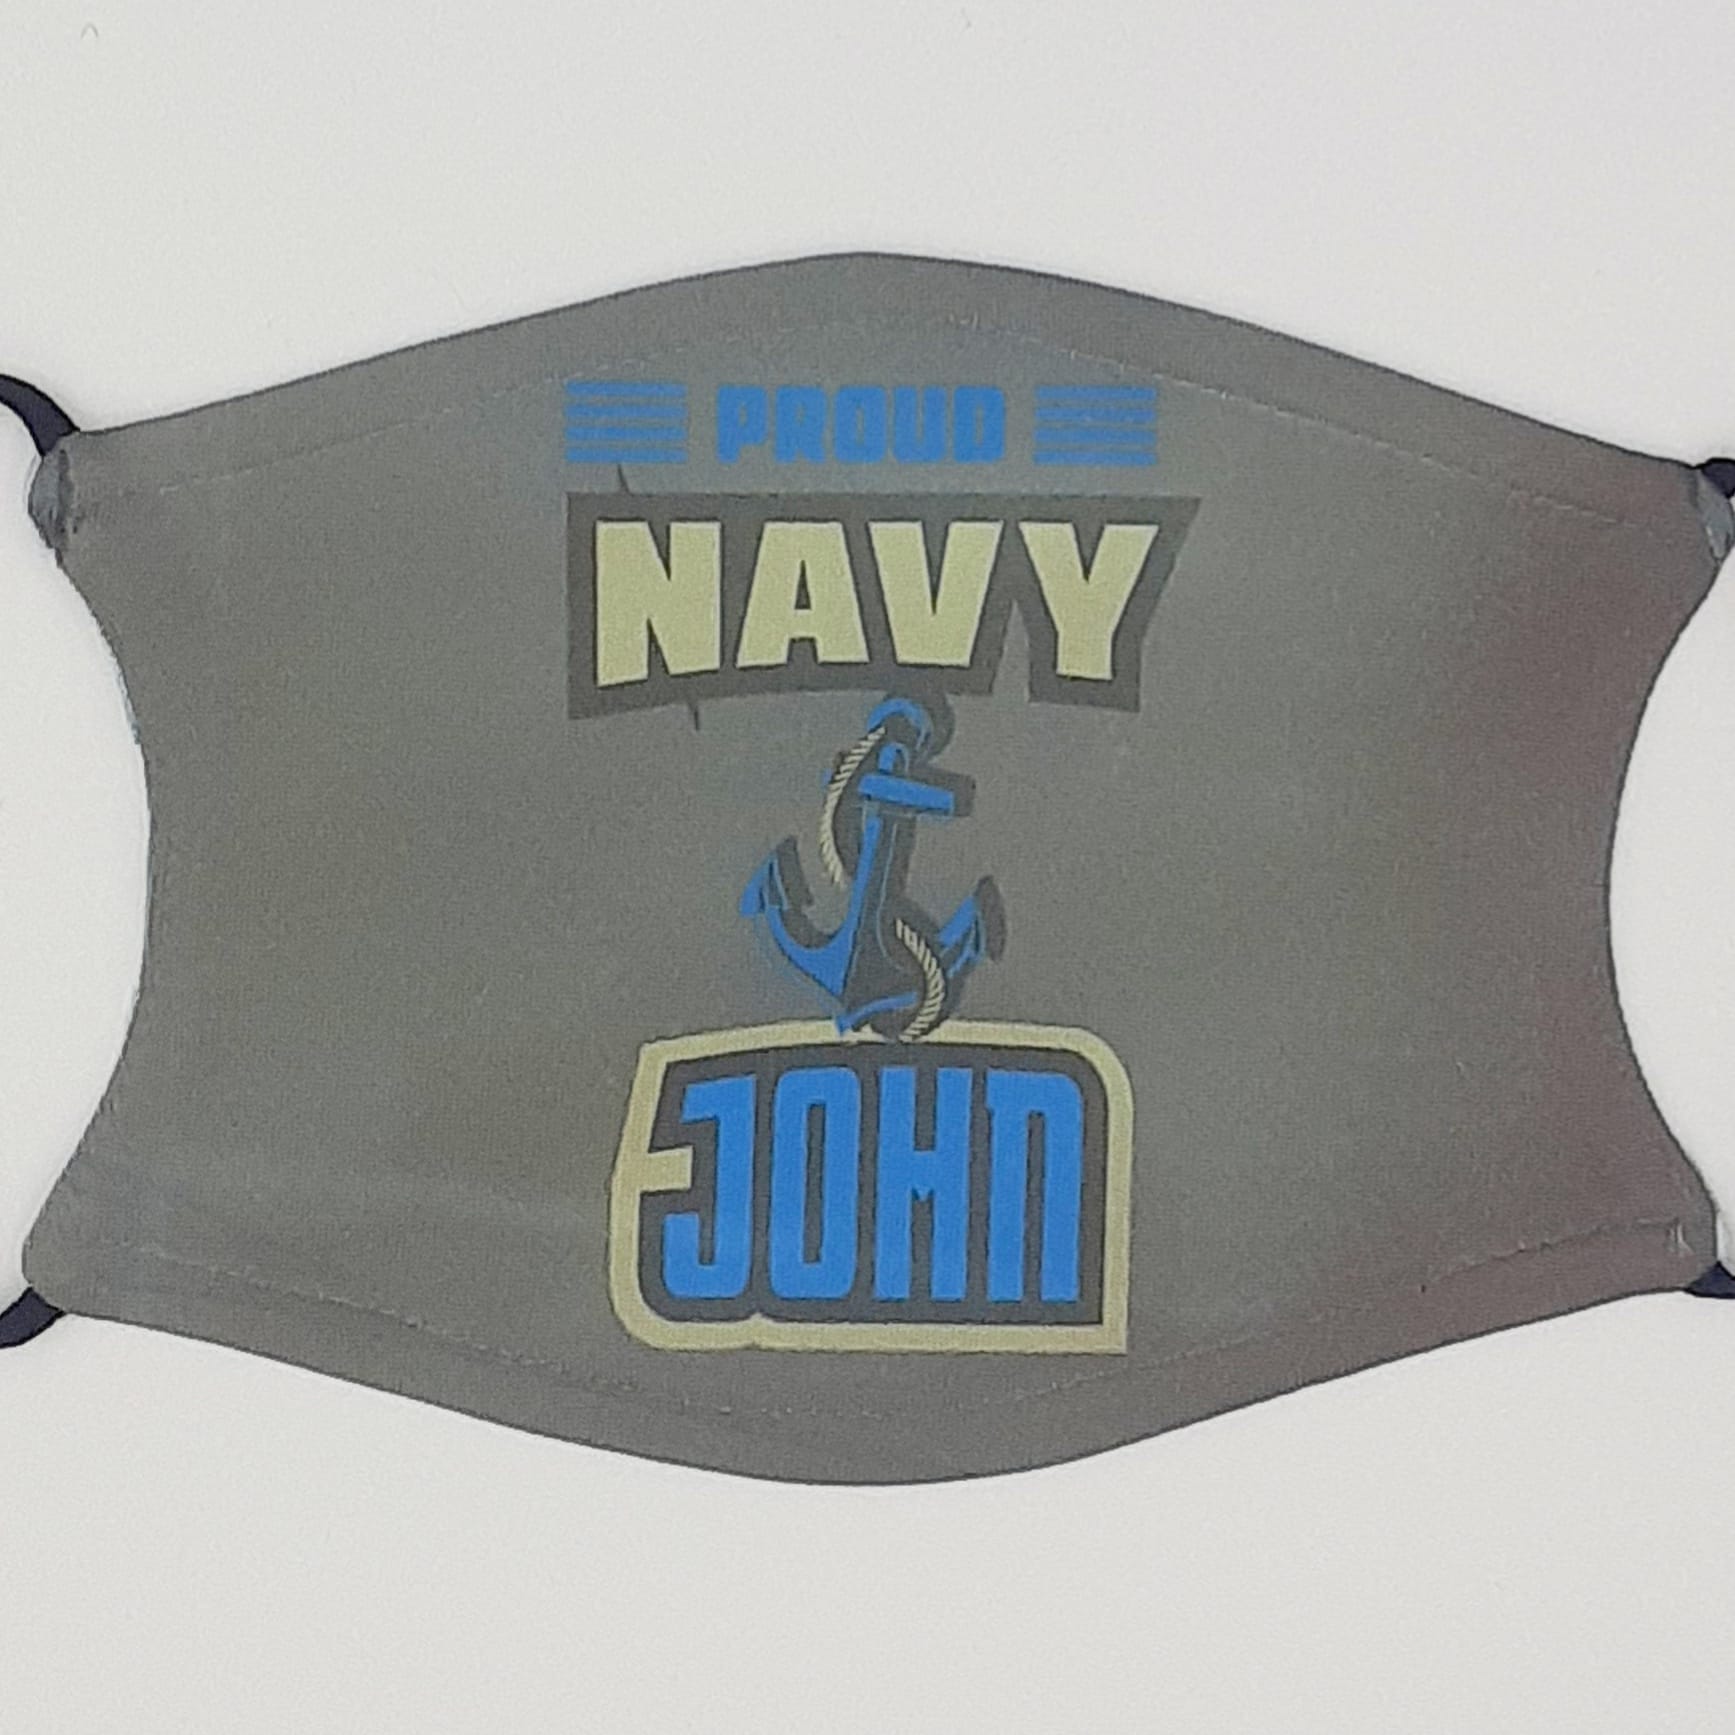 NAVY VETERAN MASK made with sublimation printing